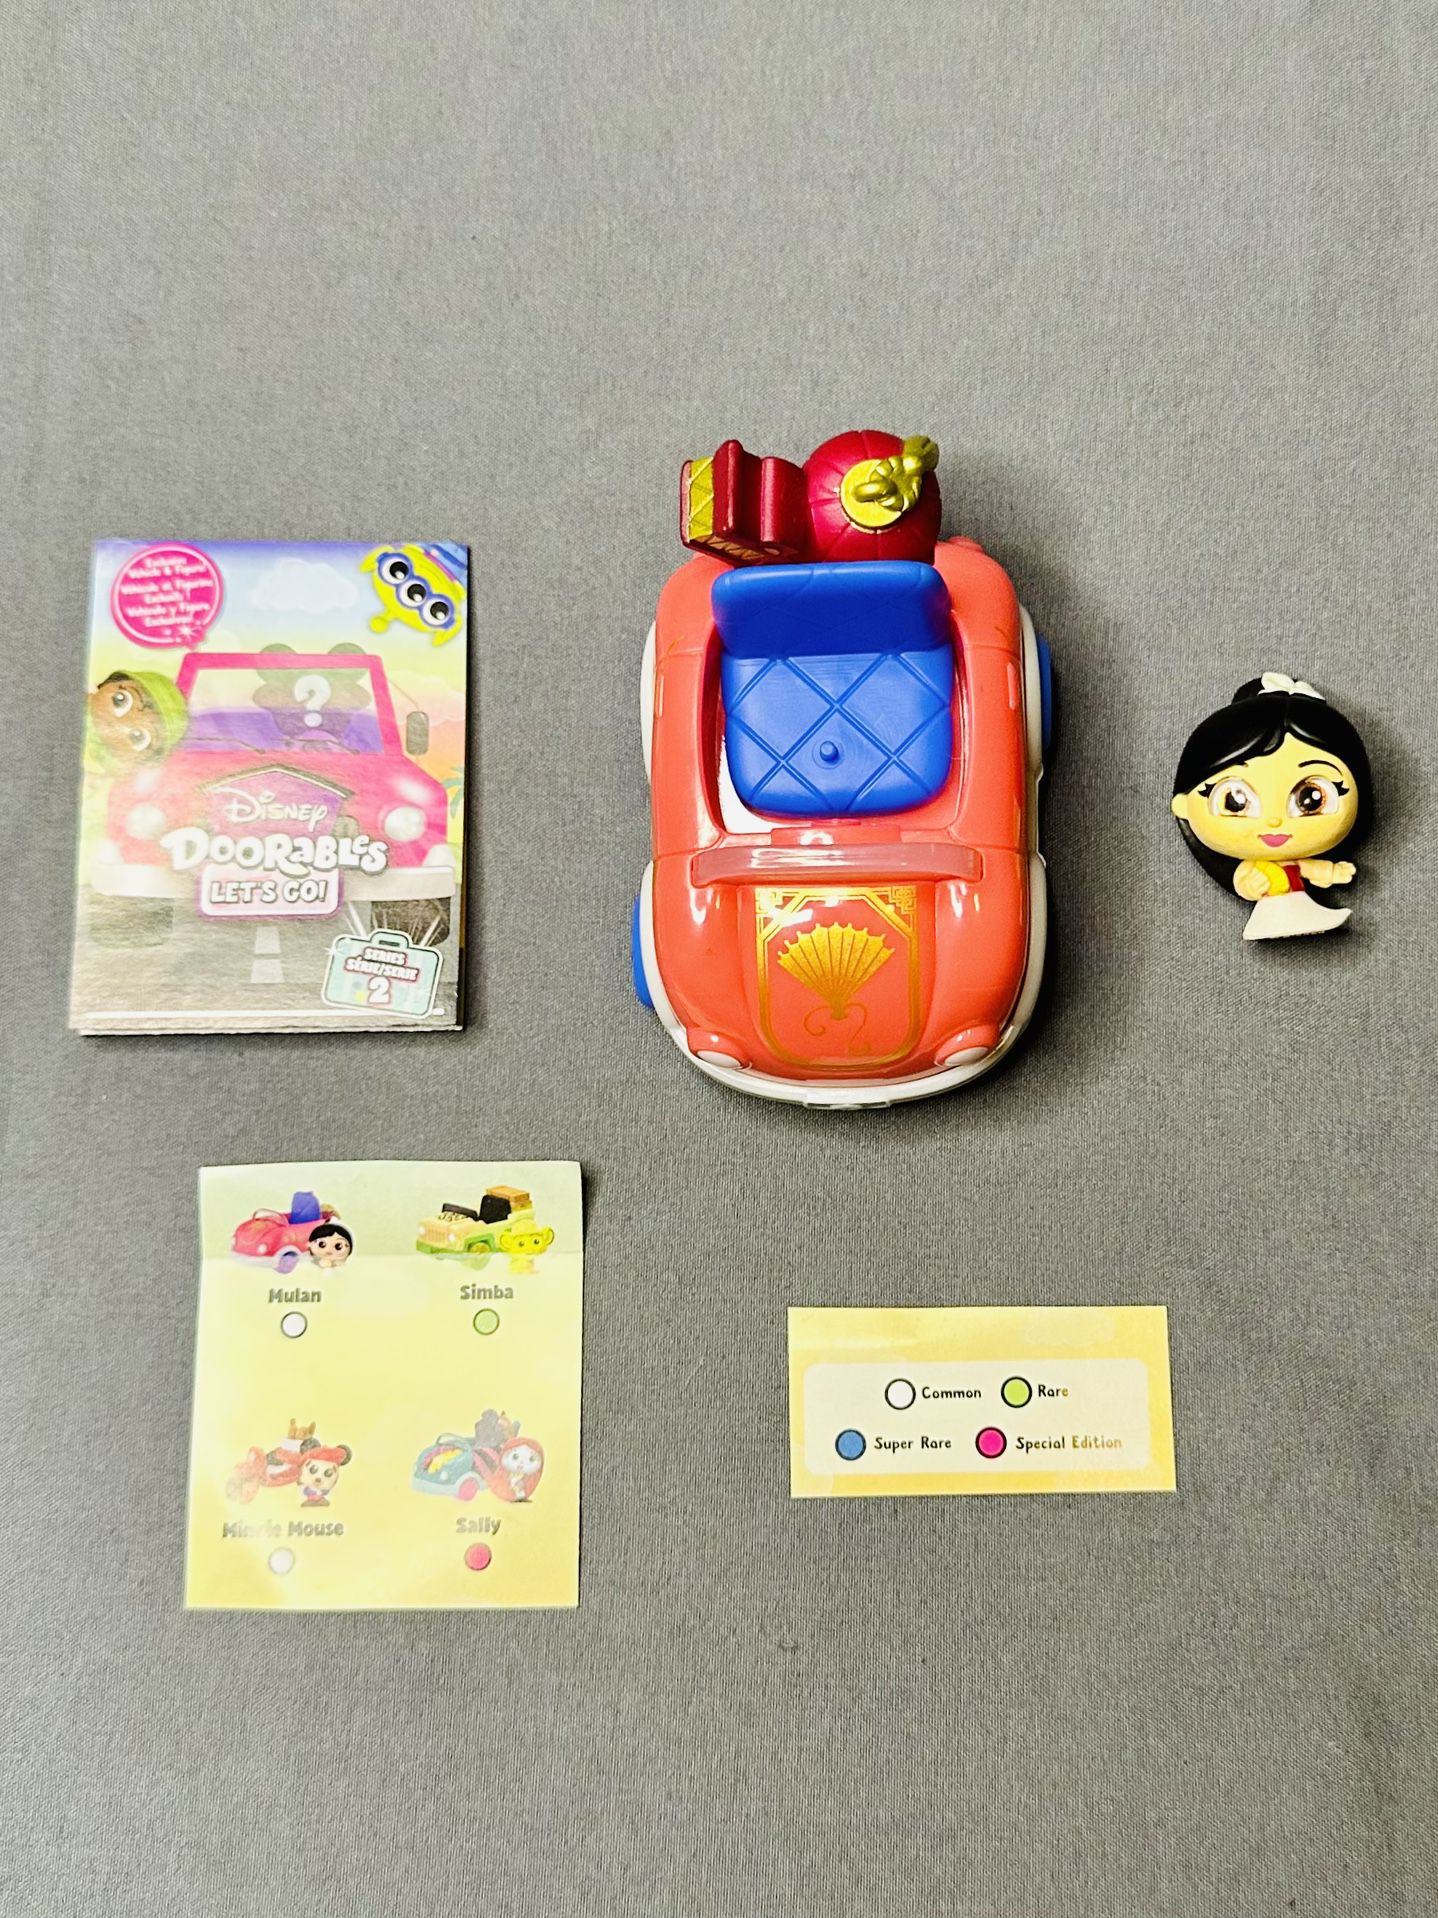 Disney Doorables Let’s Go Cars Series 2 - Mulan for Sale in Chino Hills, CA  - OfferUp